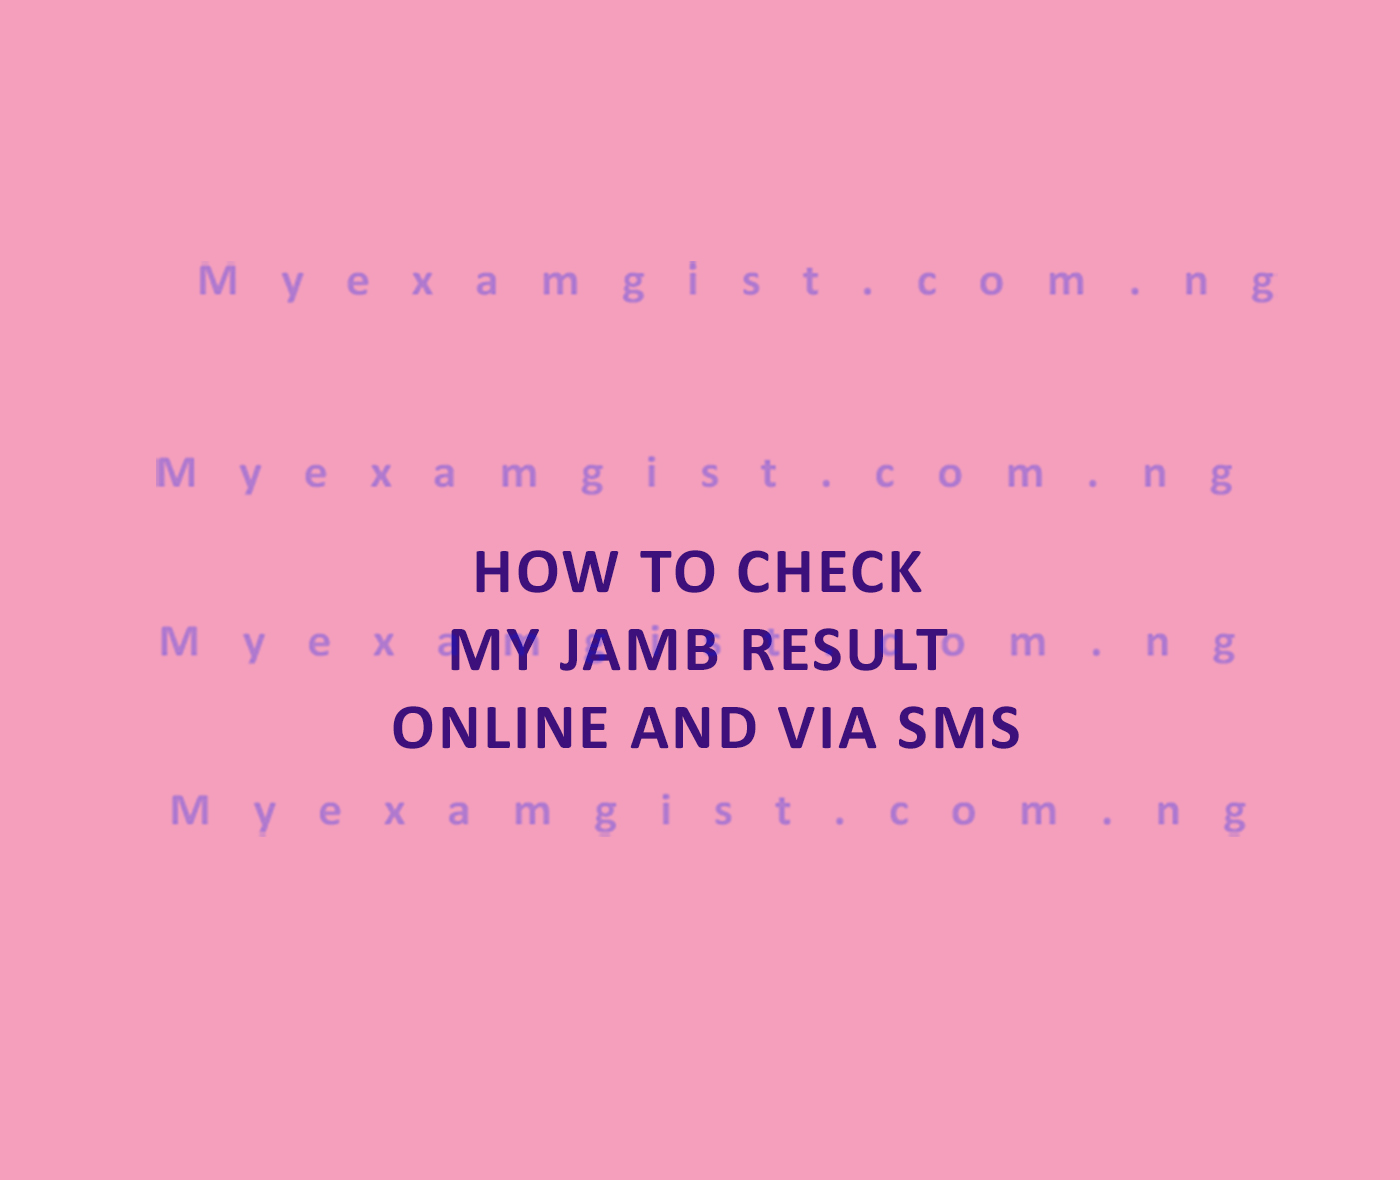 How to check my jamb result online and Via SMS